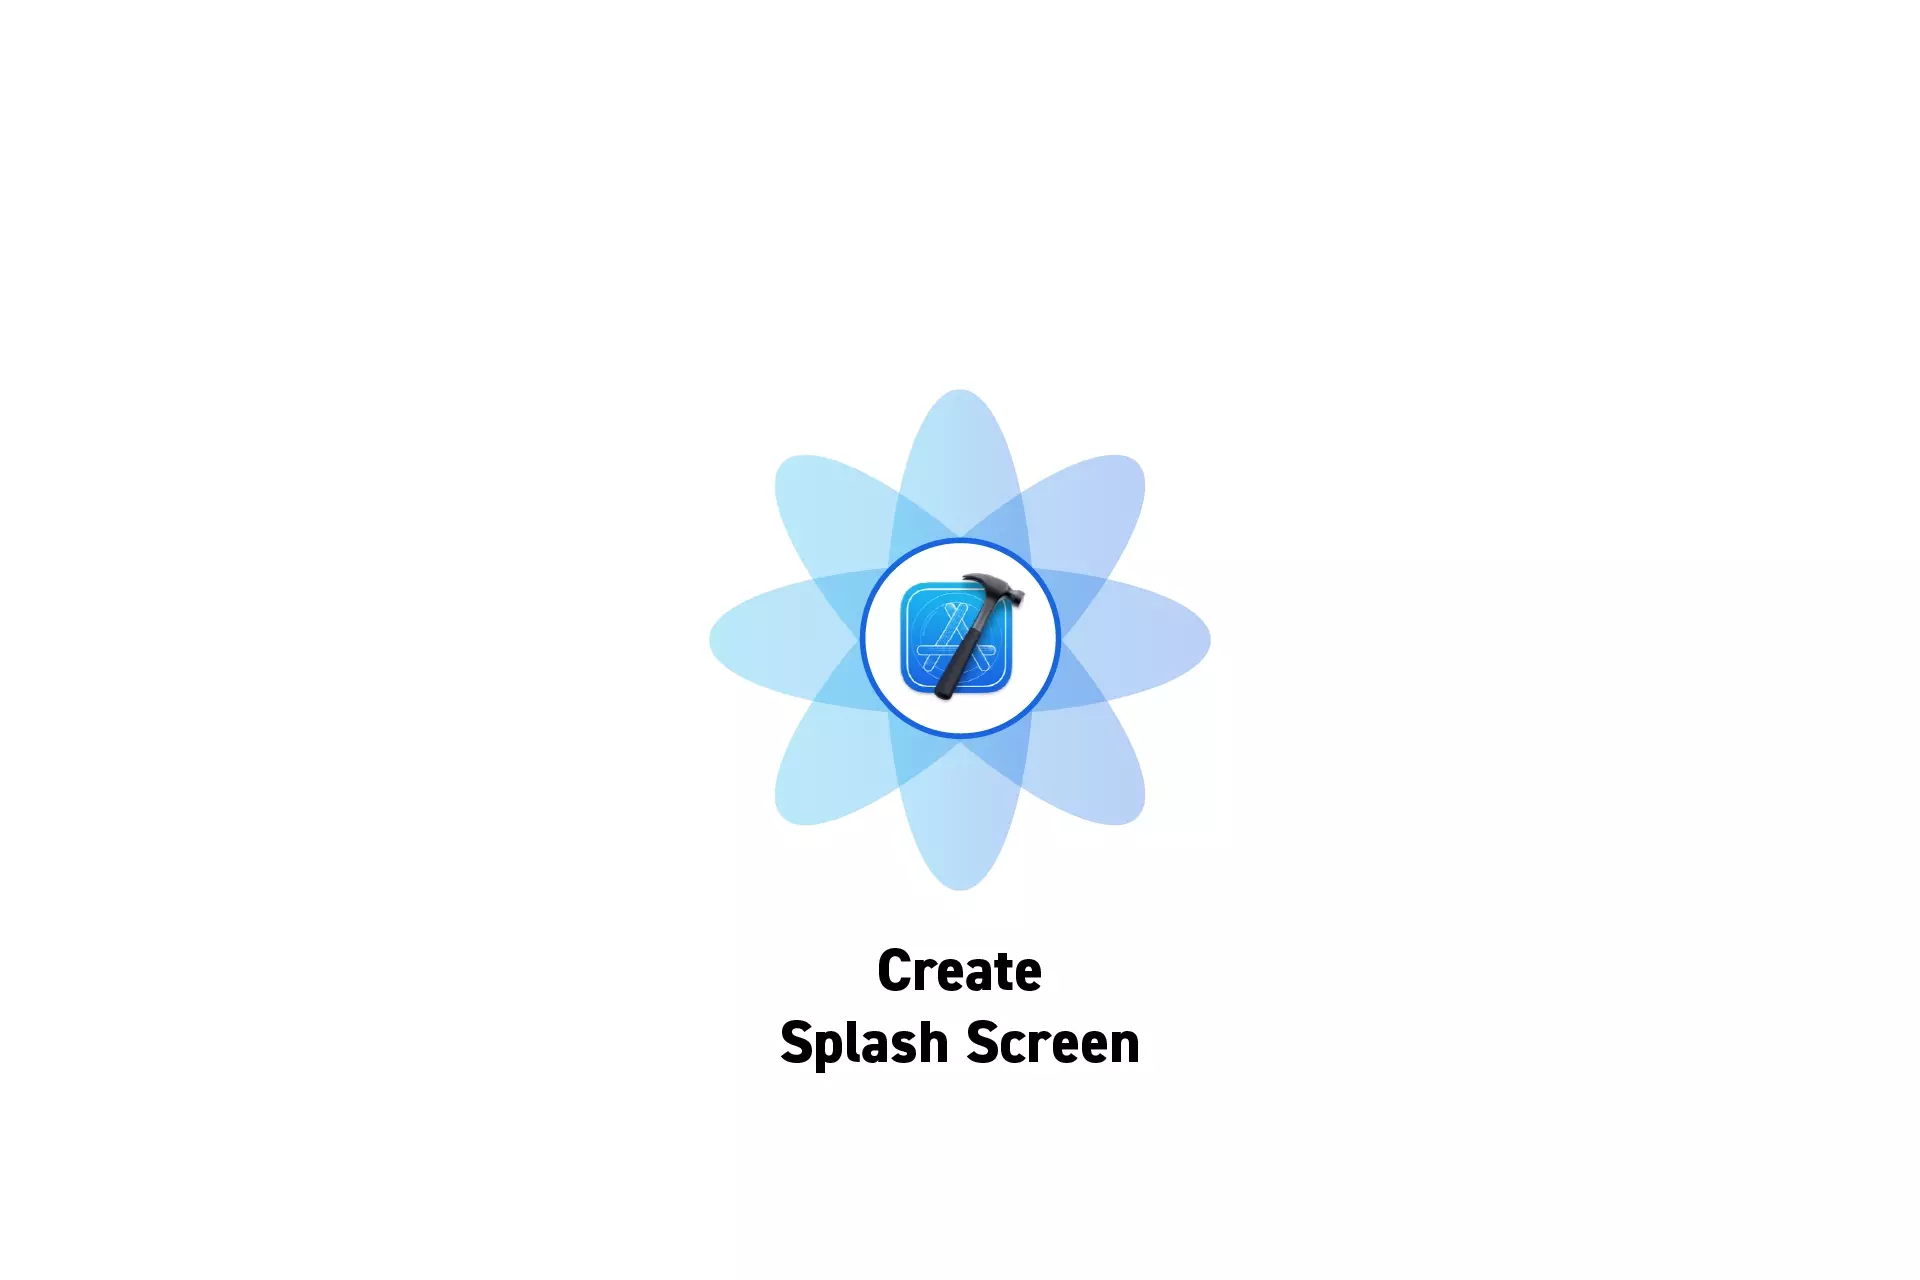 A flower that represents Xcode with the text "Create Splash Screen" beneath it.